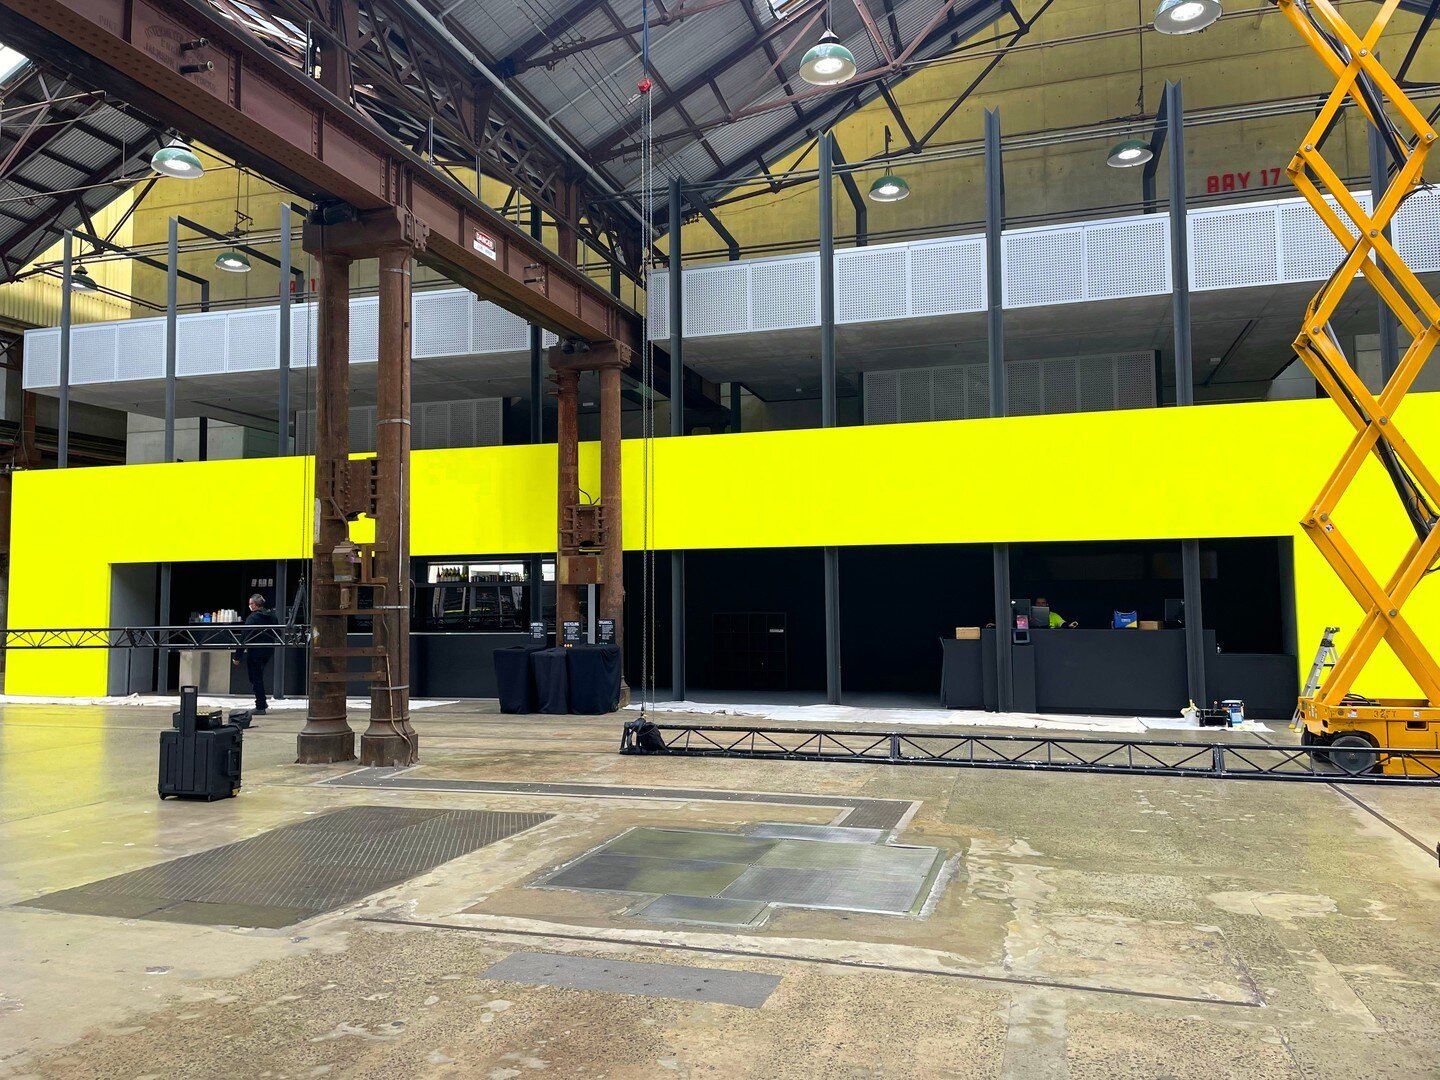 Vivid 2023 | Installation of the massive fluro walls onsite at Carriageworks for Vivid Sydney. Dream!
#creativedirection #events #design #carriageworks #vividsydney #fluro #Pantone396C

@carriageworks
@vividsydney